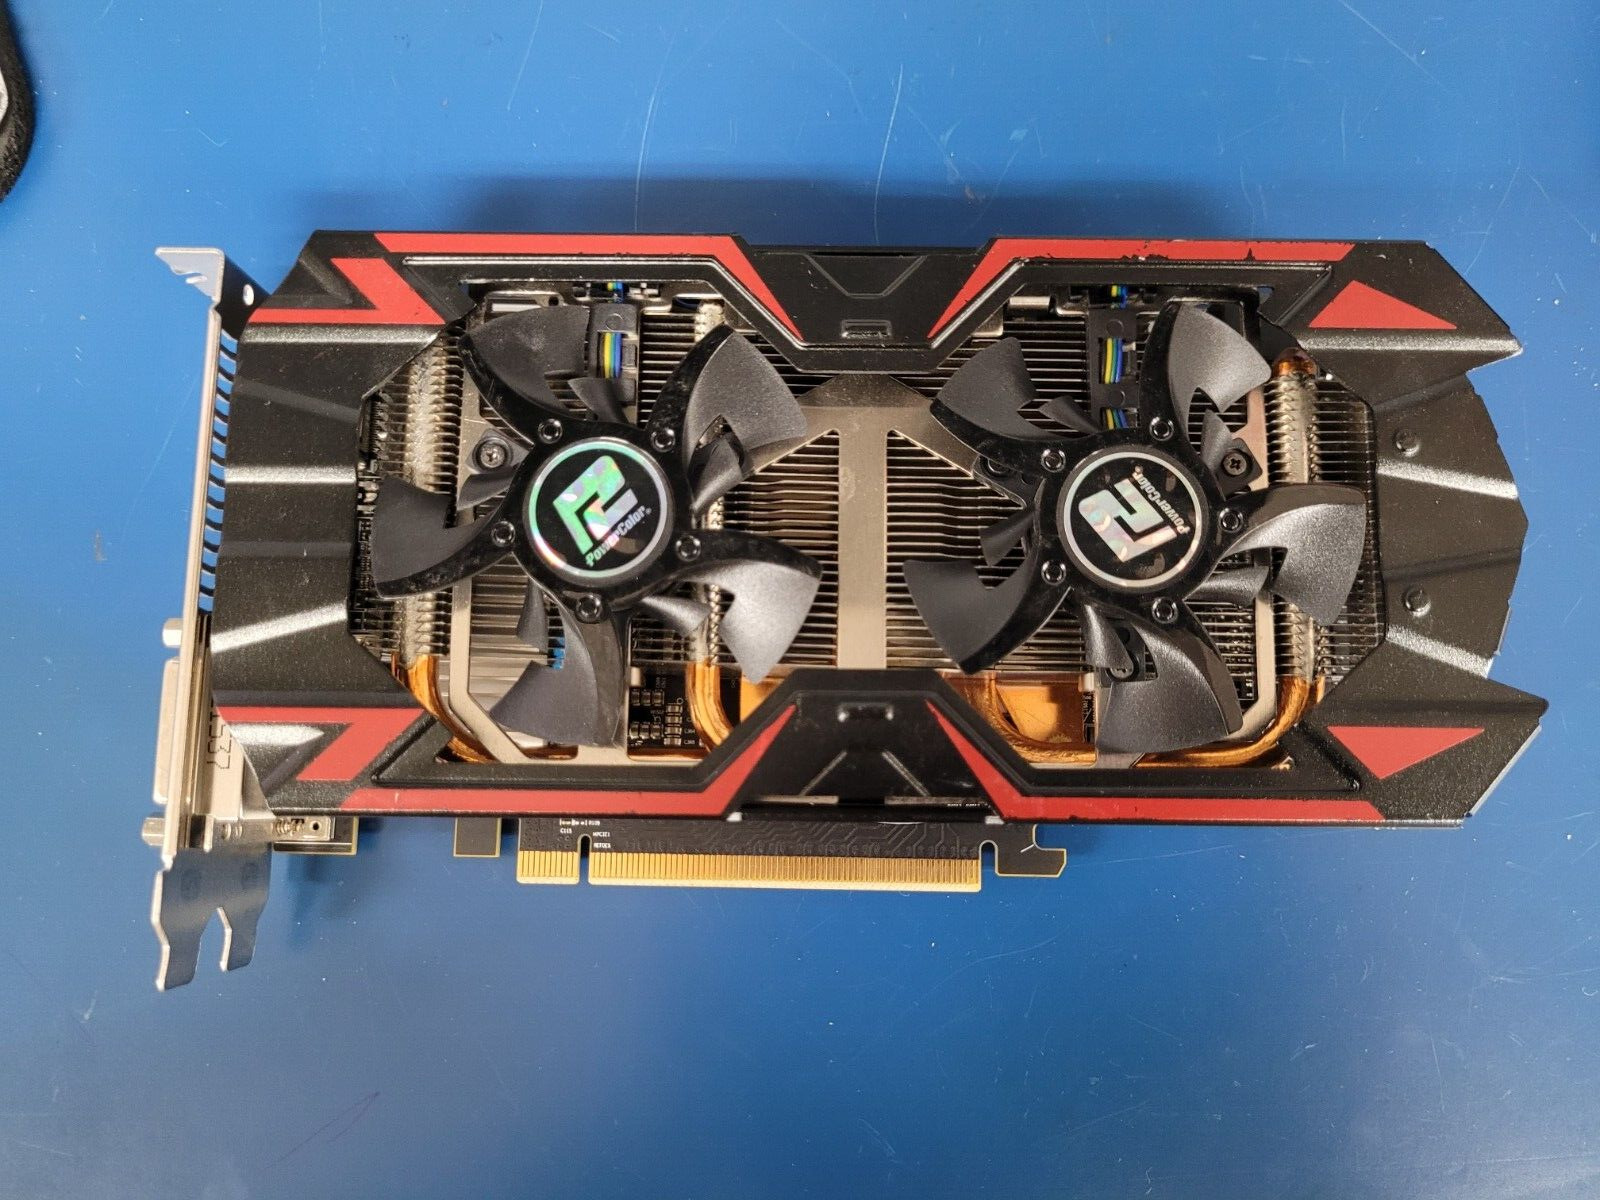 PowerColor R9 380 4GBD5-PPDHE. - Works Great